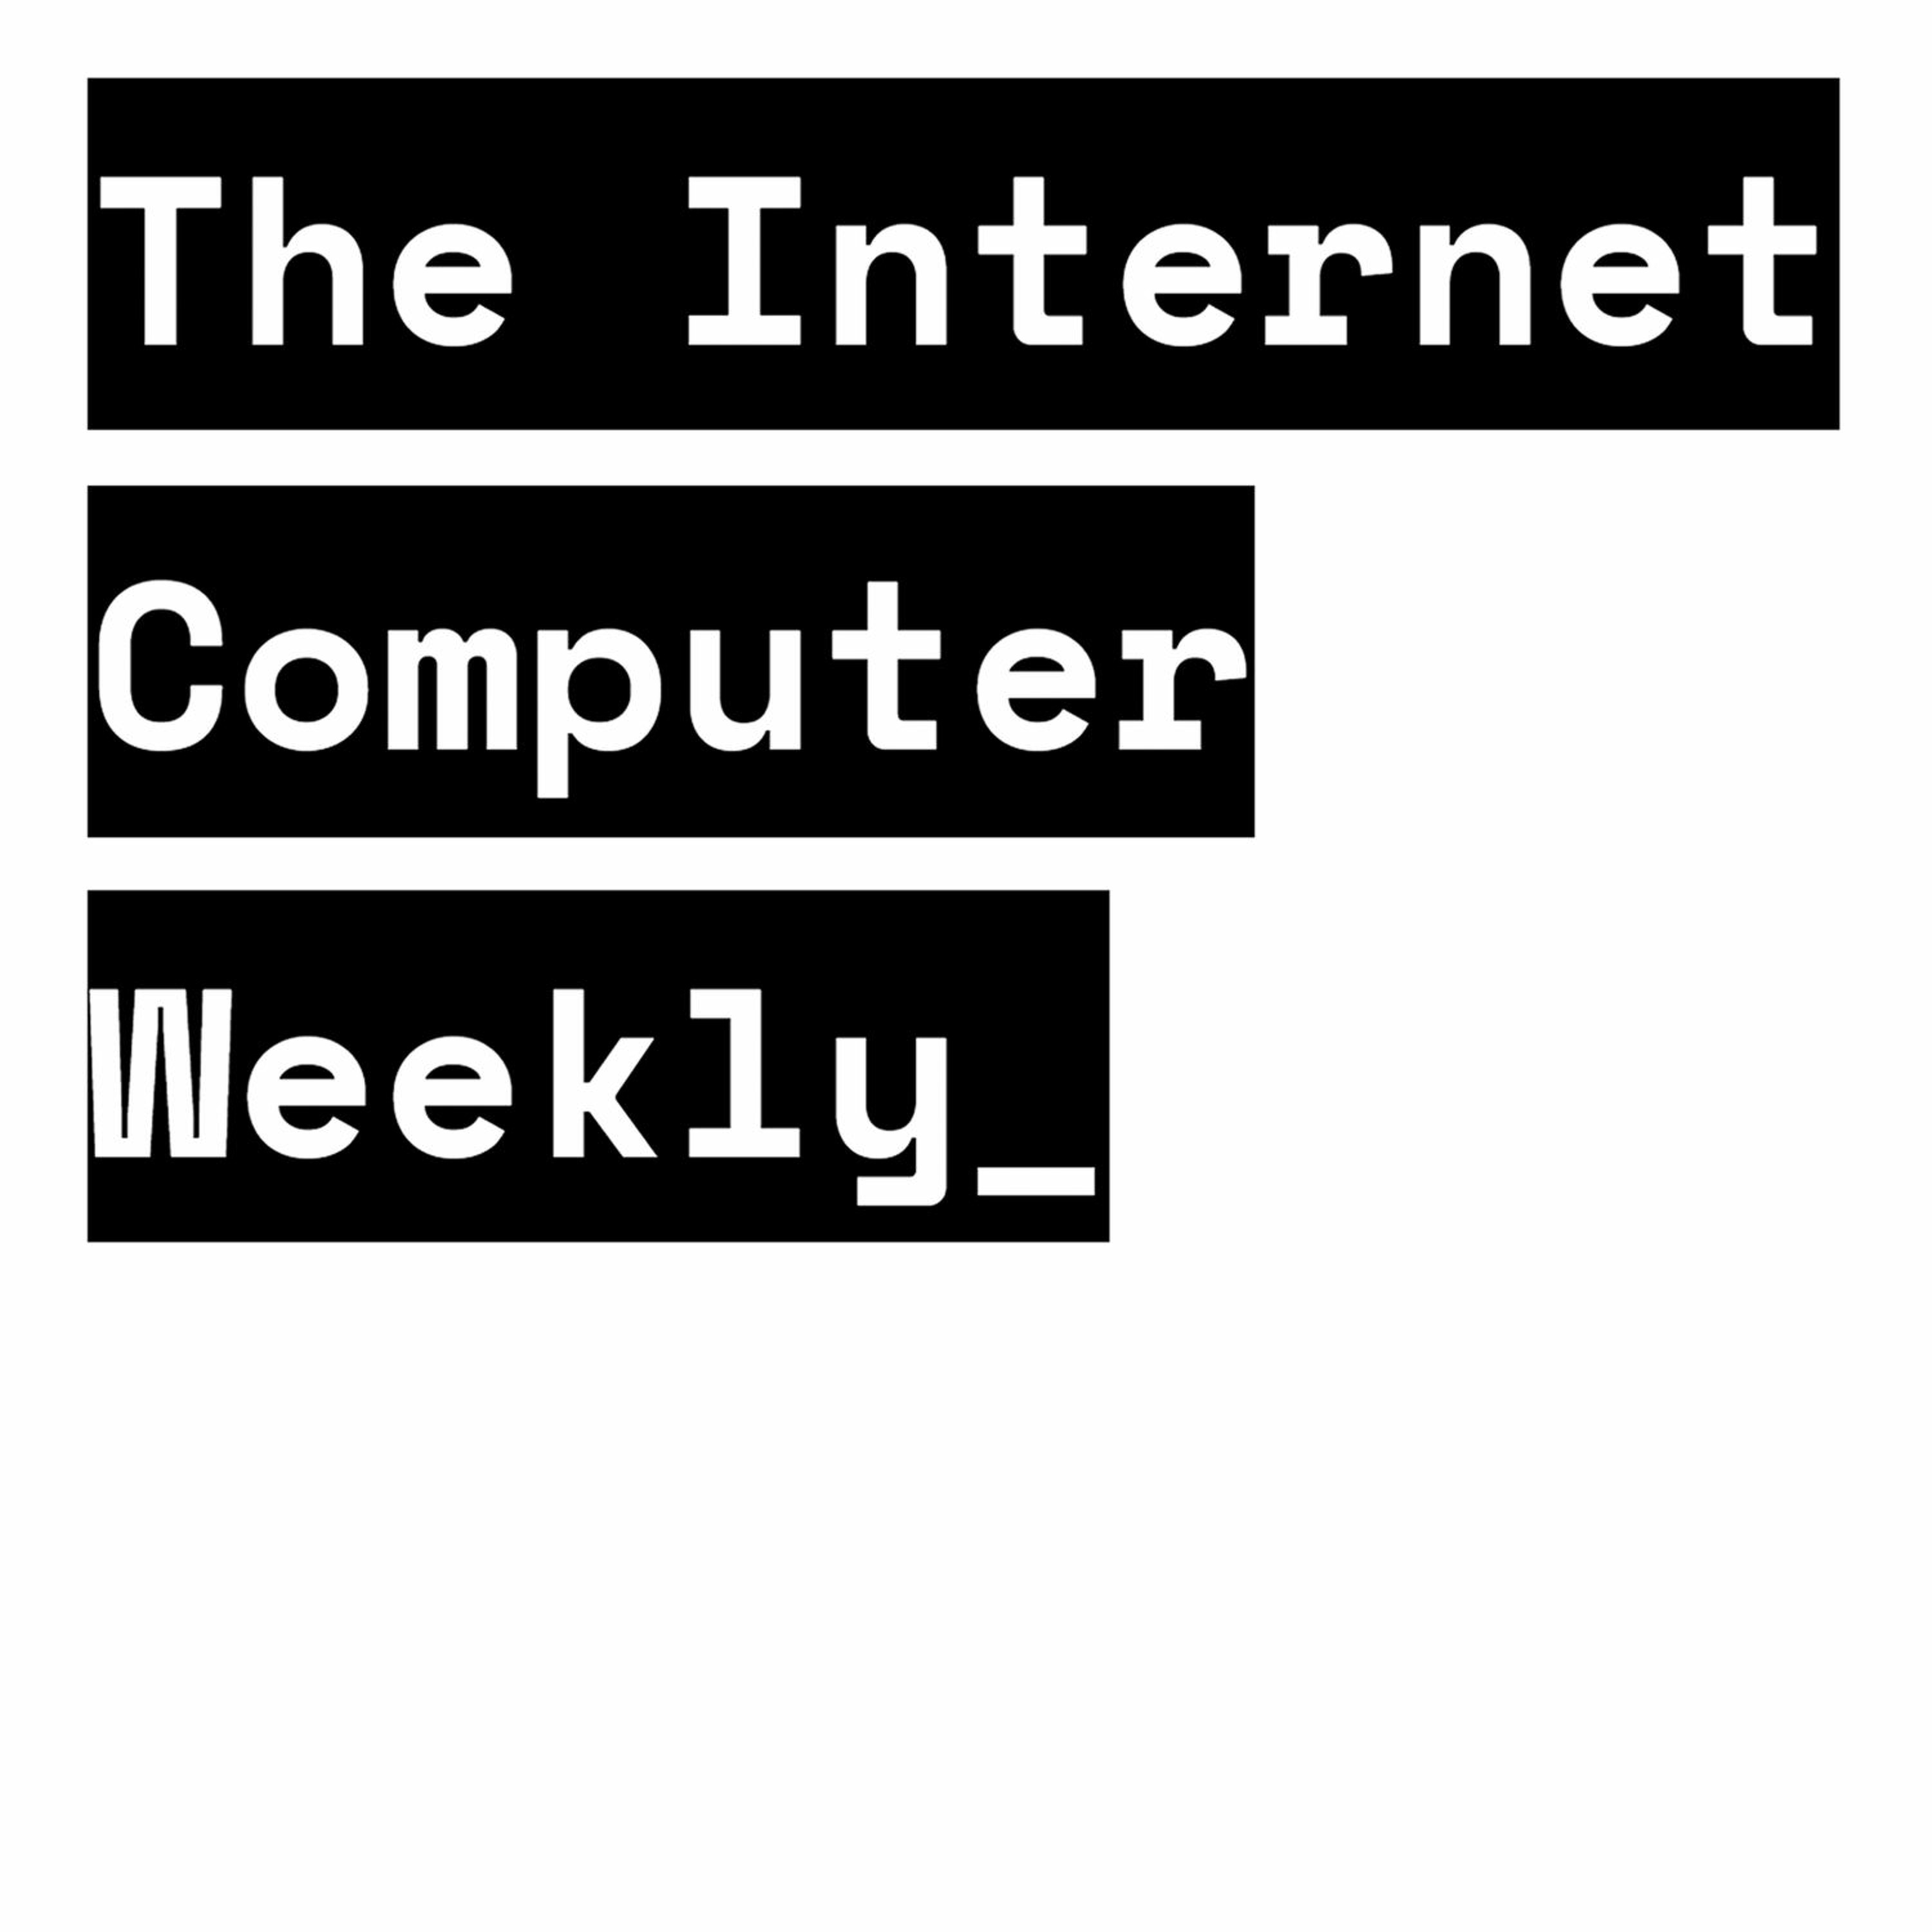 The Internet Computer Weekly #2 - Tacen